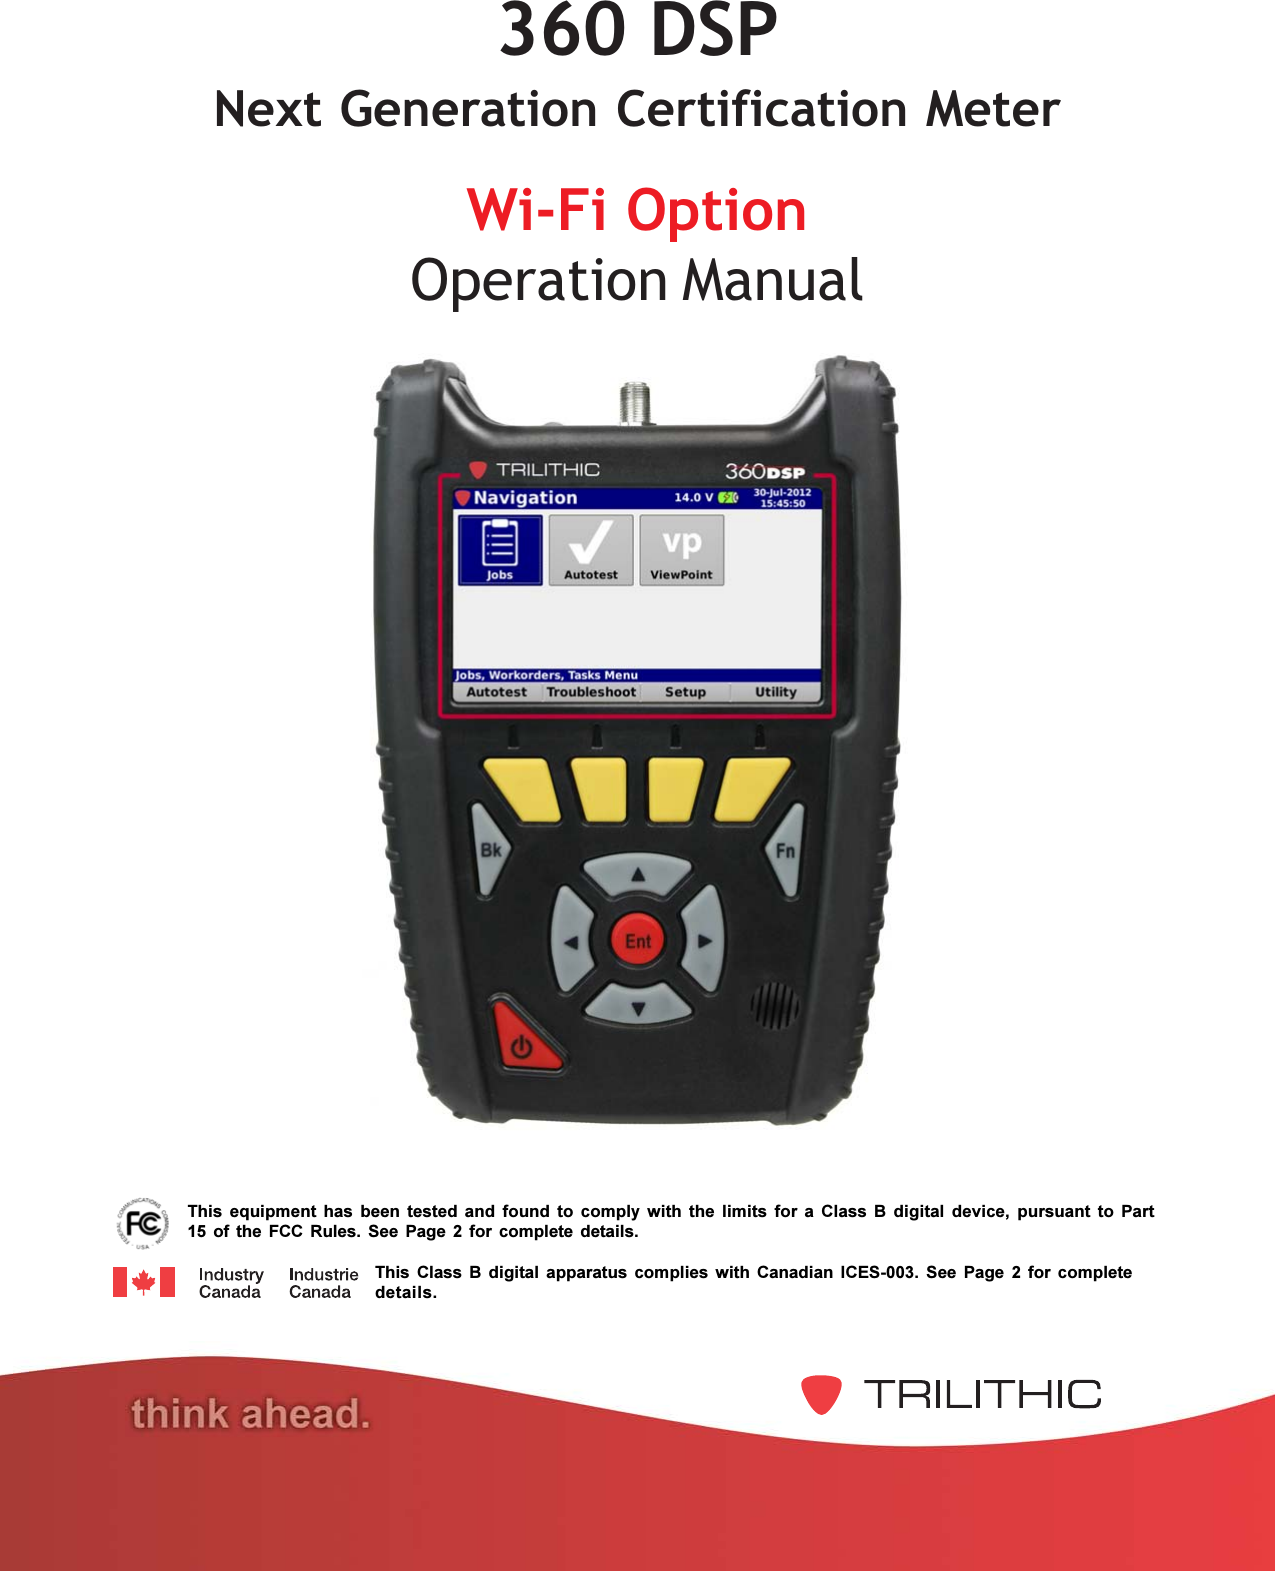 Wi-Fi OptionOperation Manual360 DSPNext Generation Certification MeterThis  equipment  has  been  tested  and  found  to  comply  with  the  limits  for  a  Class  B  digital  device,  pursuant  to  Part15  of  the  FCC  Rules.  See  Page  2  for  complete  details.This  Class  B  digital  apparatus  complies  with  Canadian  ICES-003.  See  Page  2  for  completedetails.